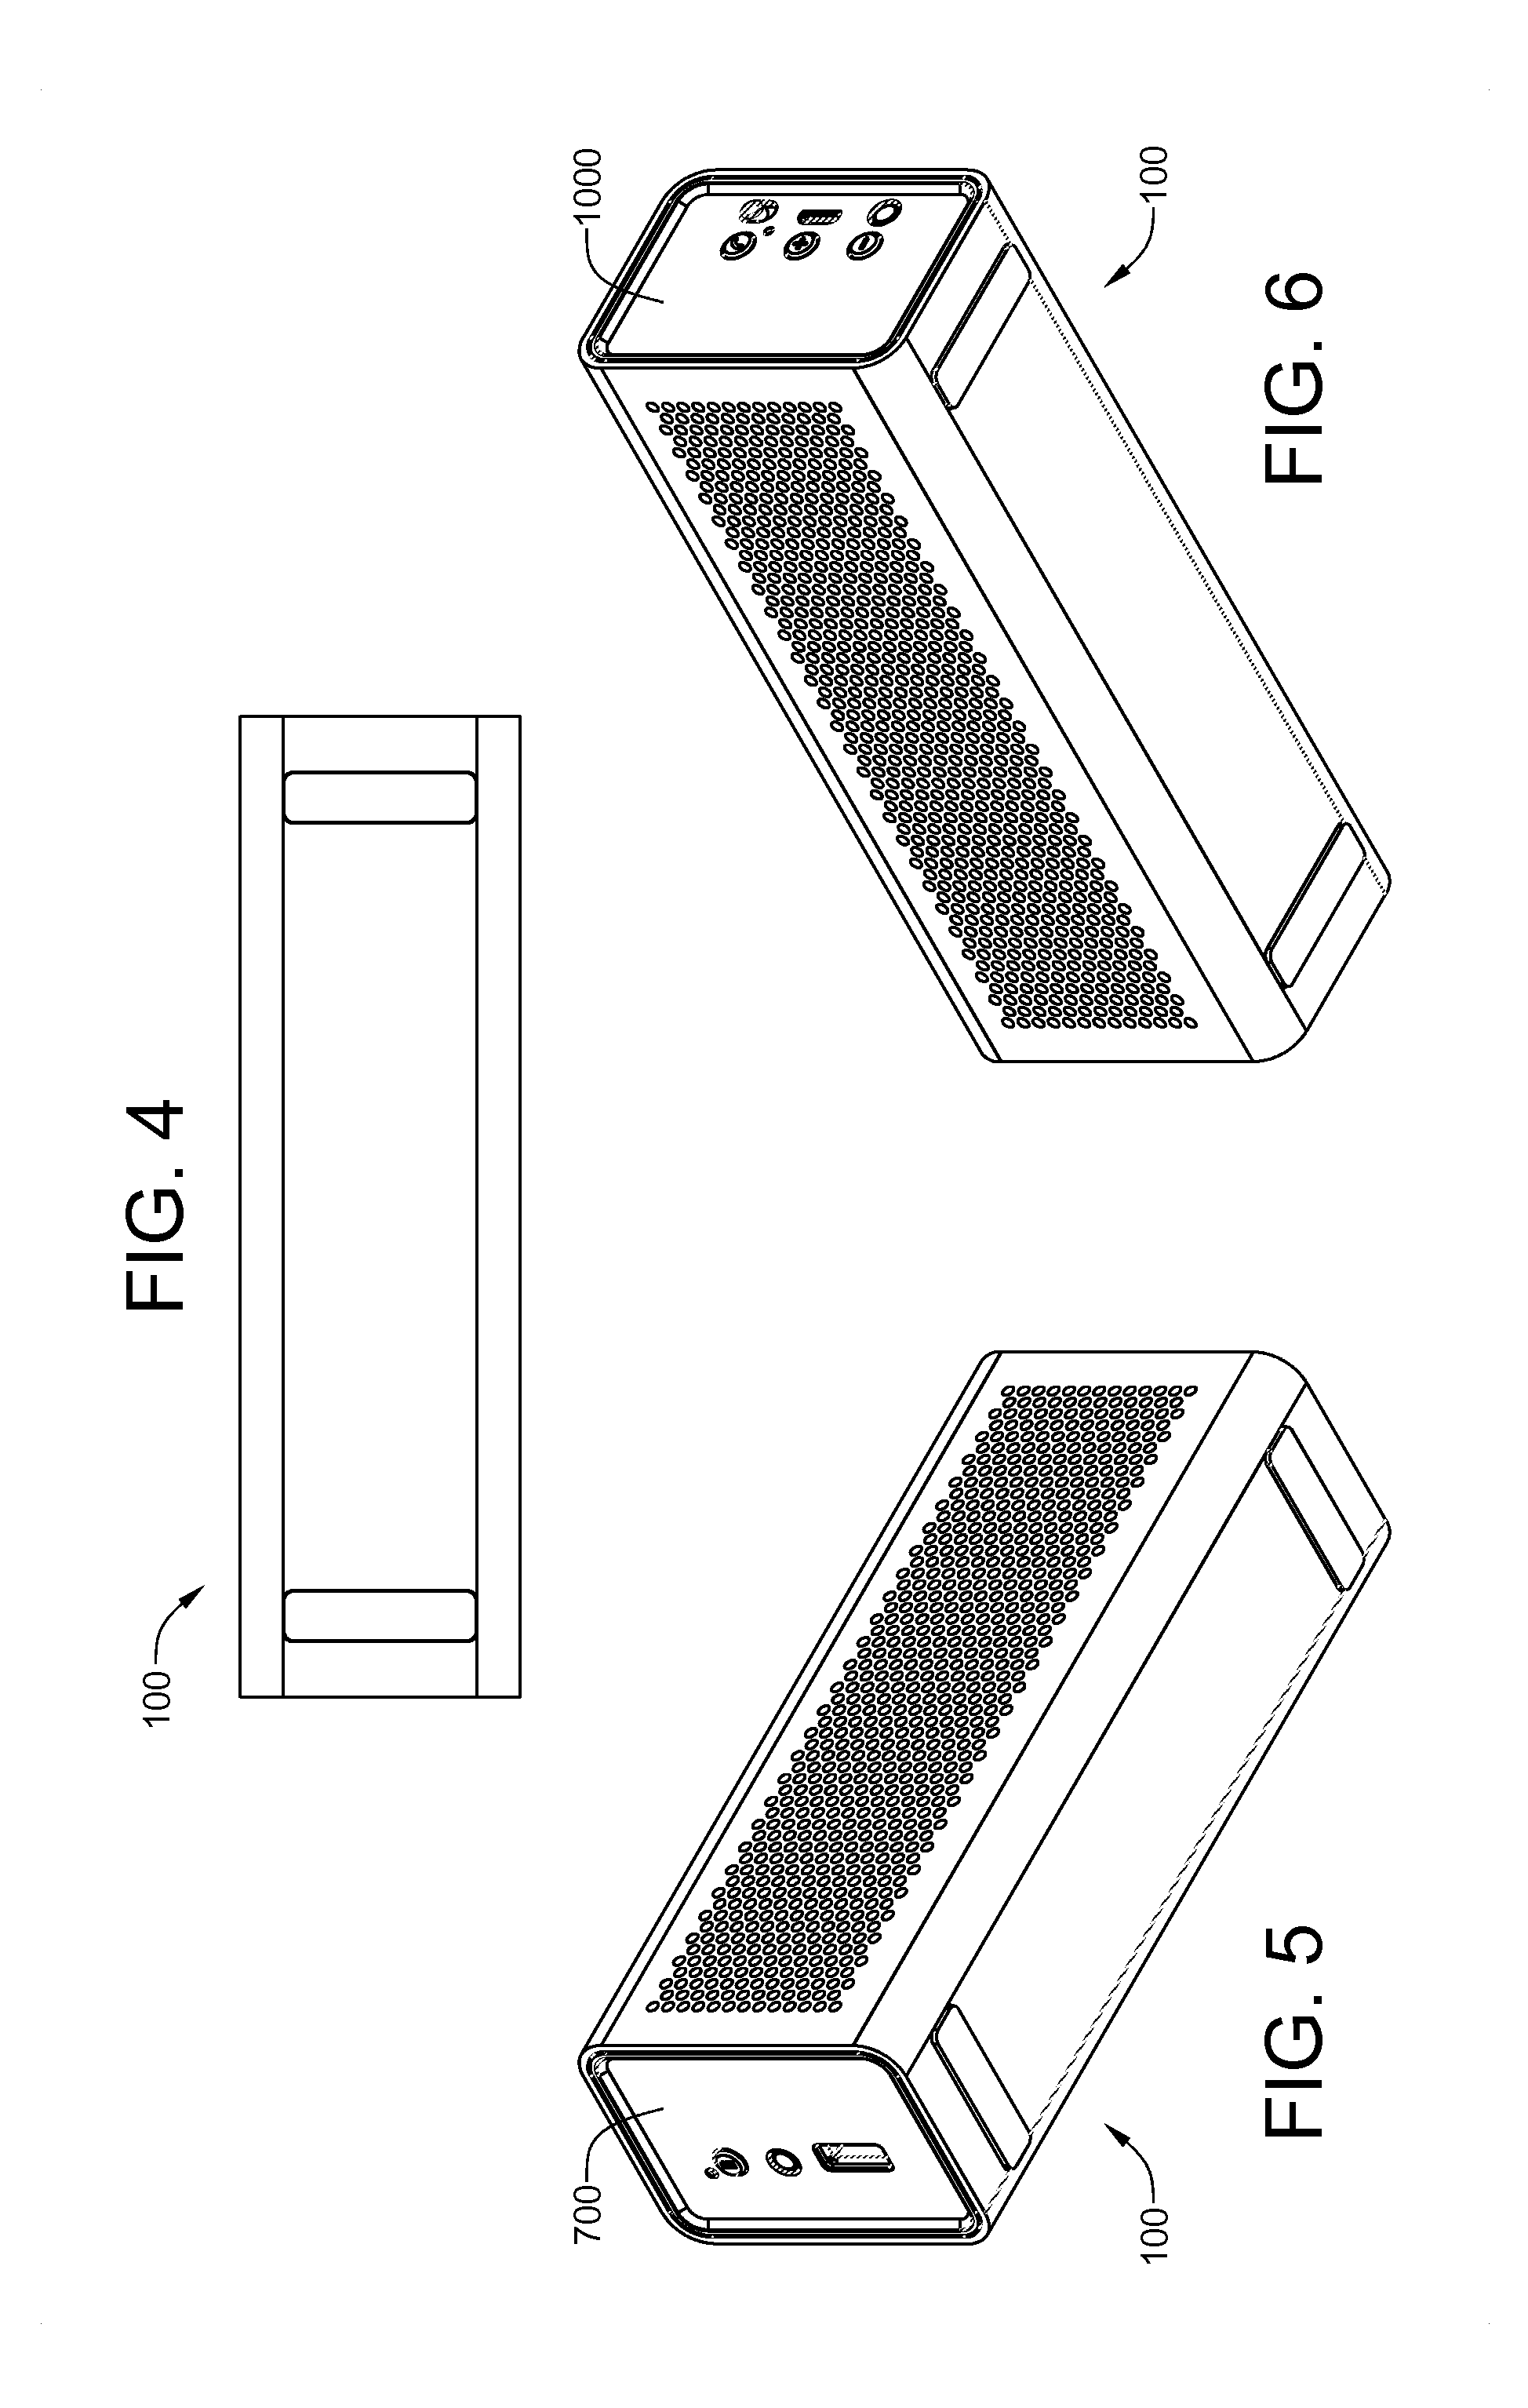 Battery-powered stereo speaker assembly having power connection for charging a handheld device